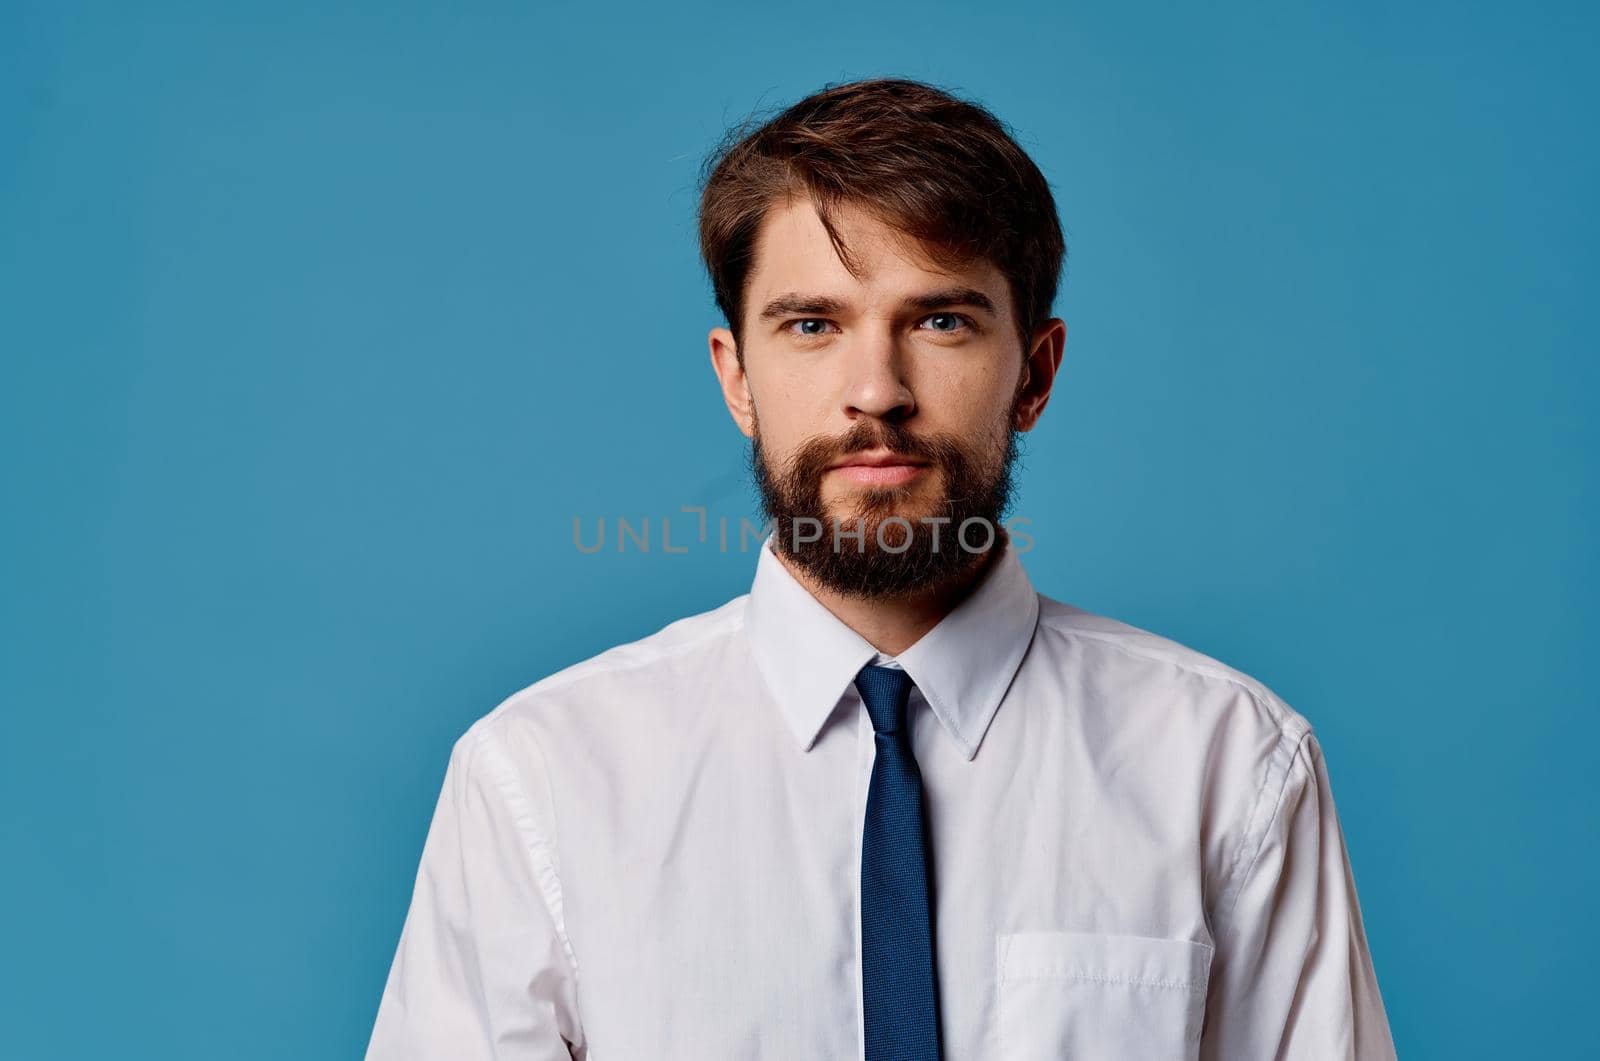 business man shirt with tie office manager blue background. High quality photo